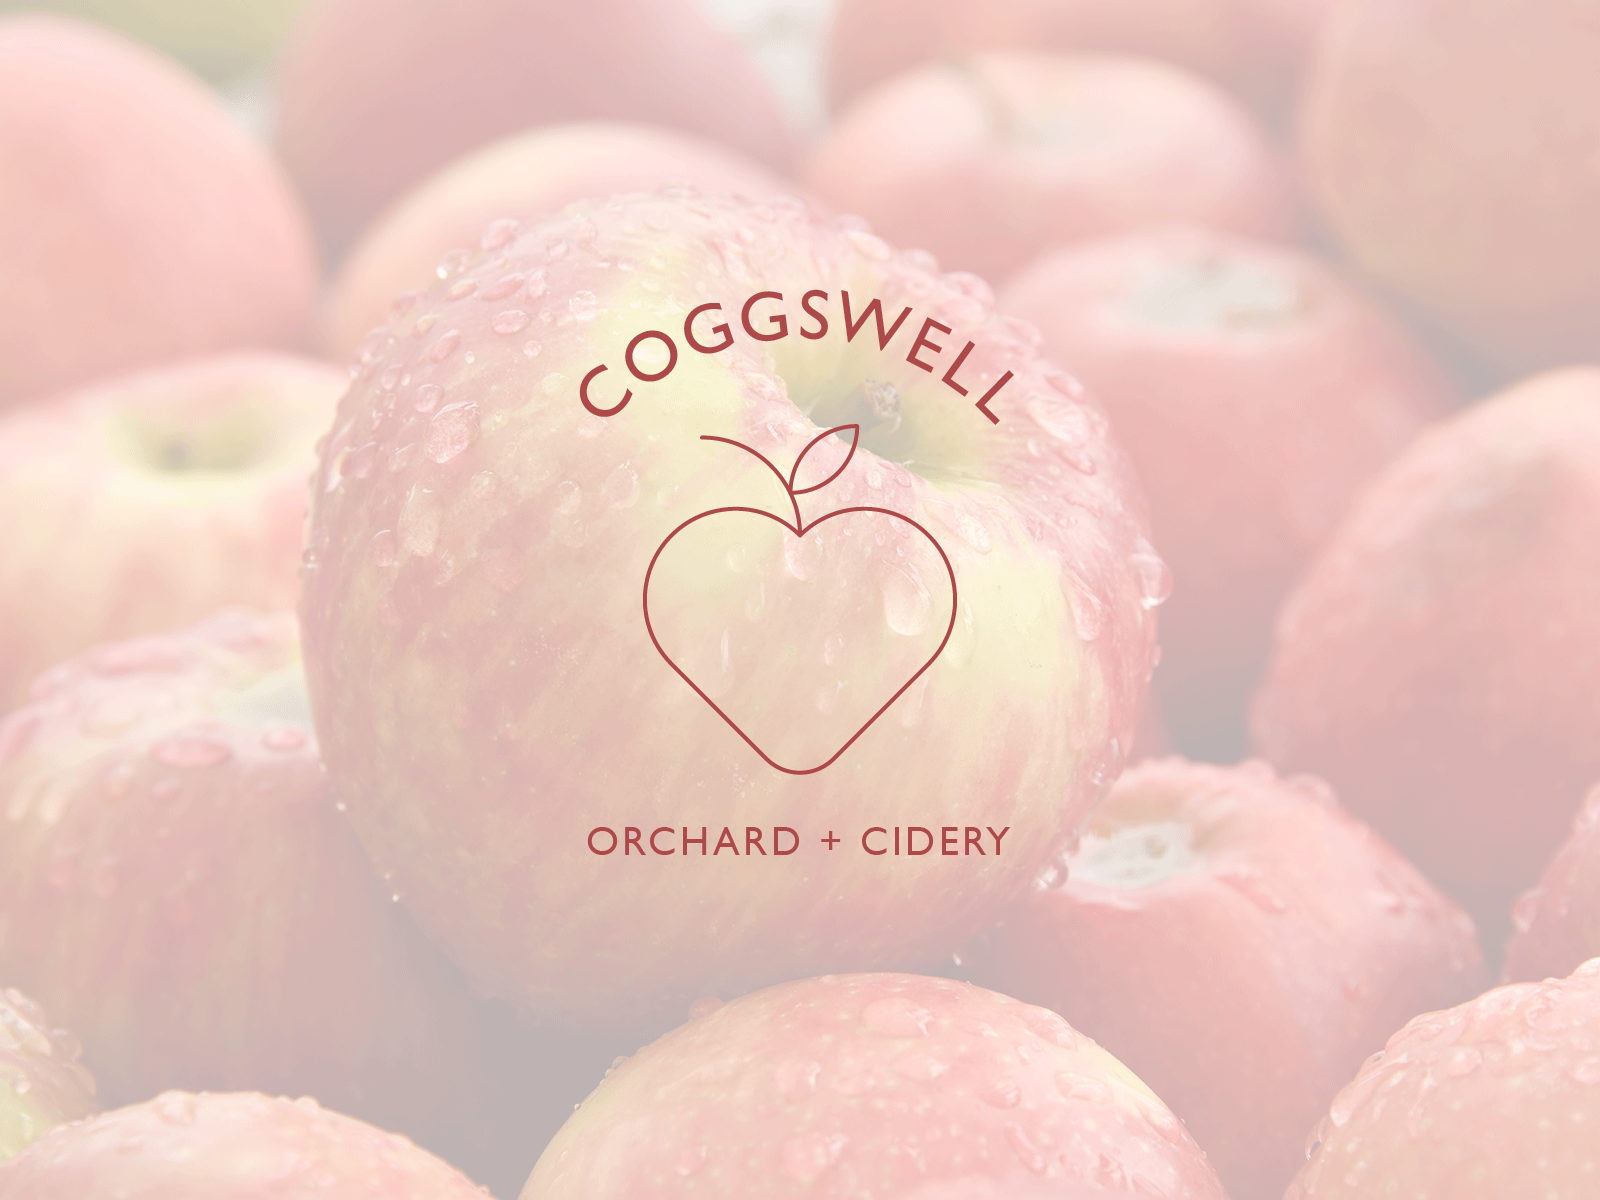 Coggswell Orchard + Cidery Logos